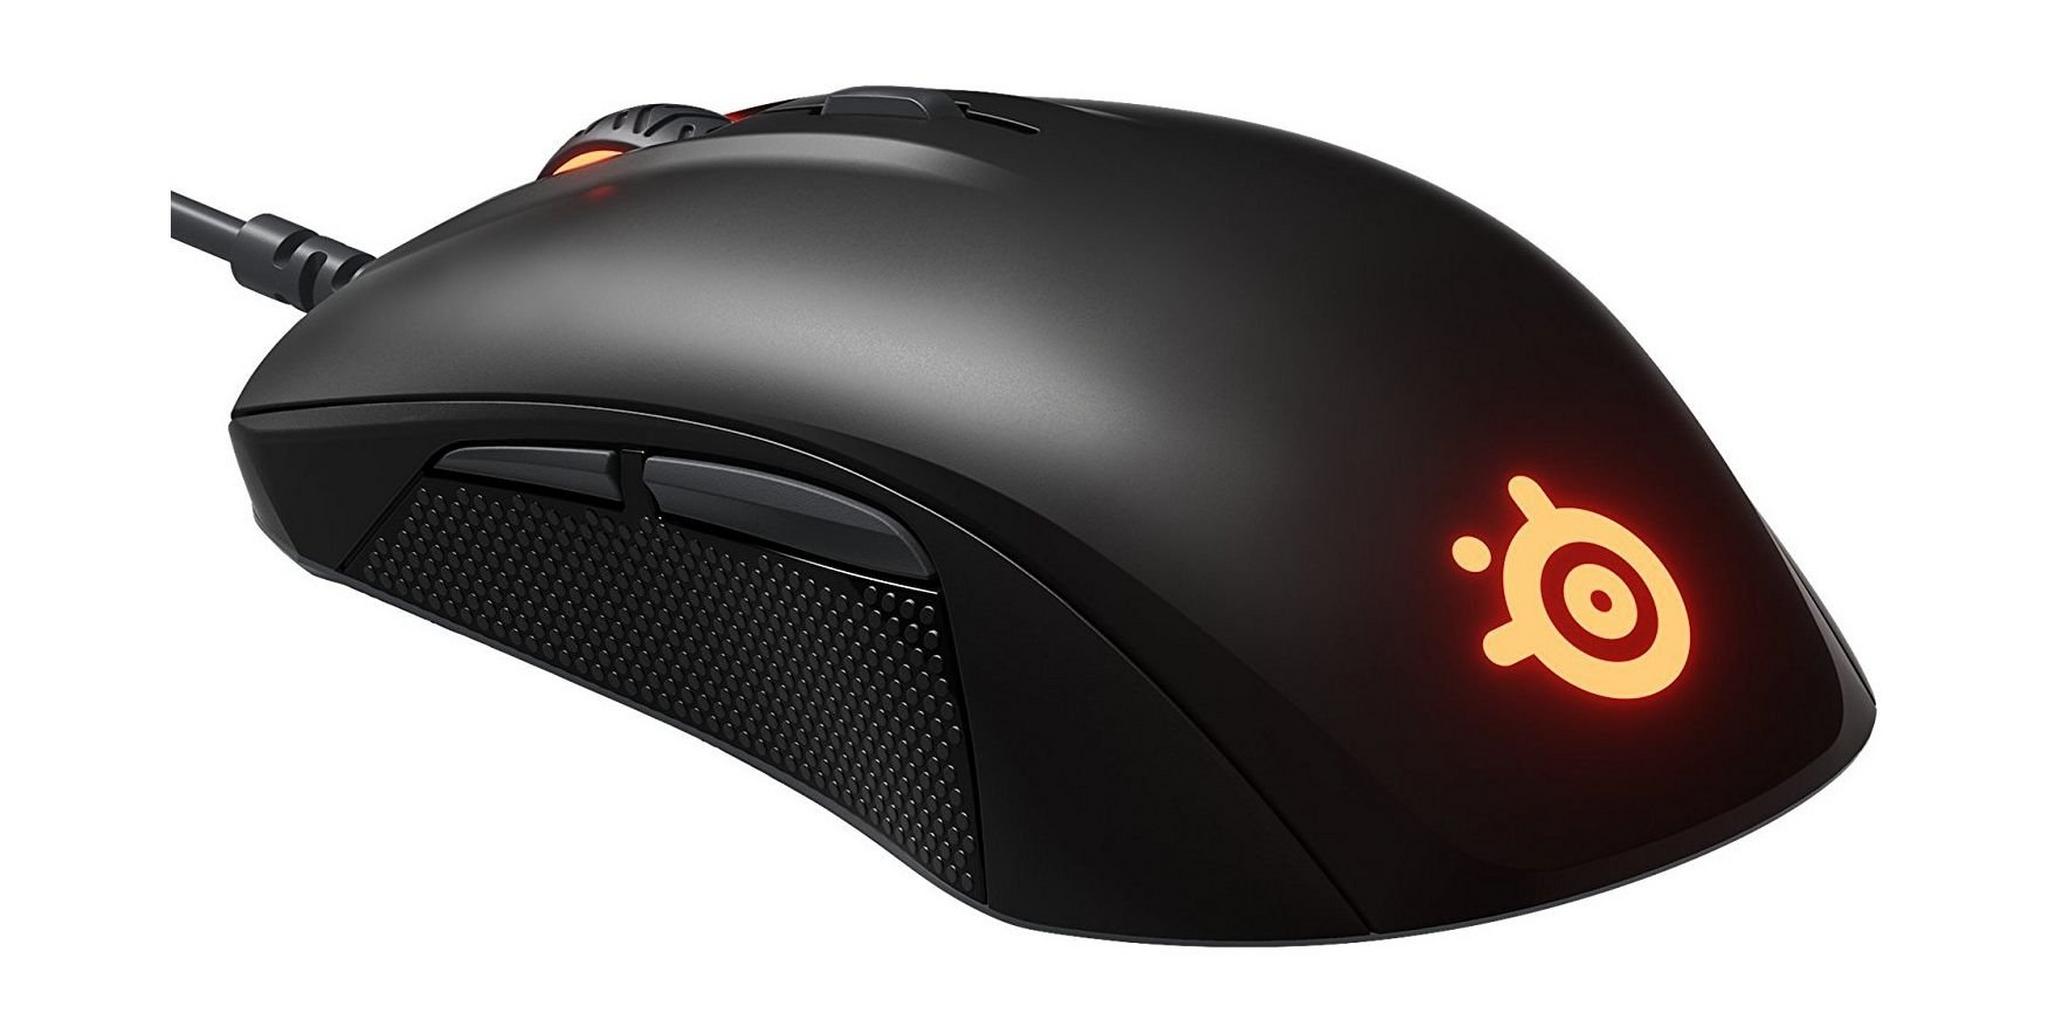 SteelSeries Rival 110 Gaming Mouse - Matte Black